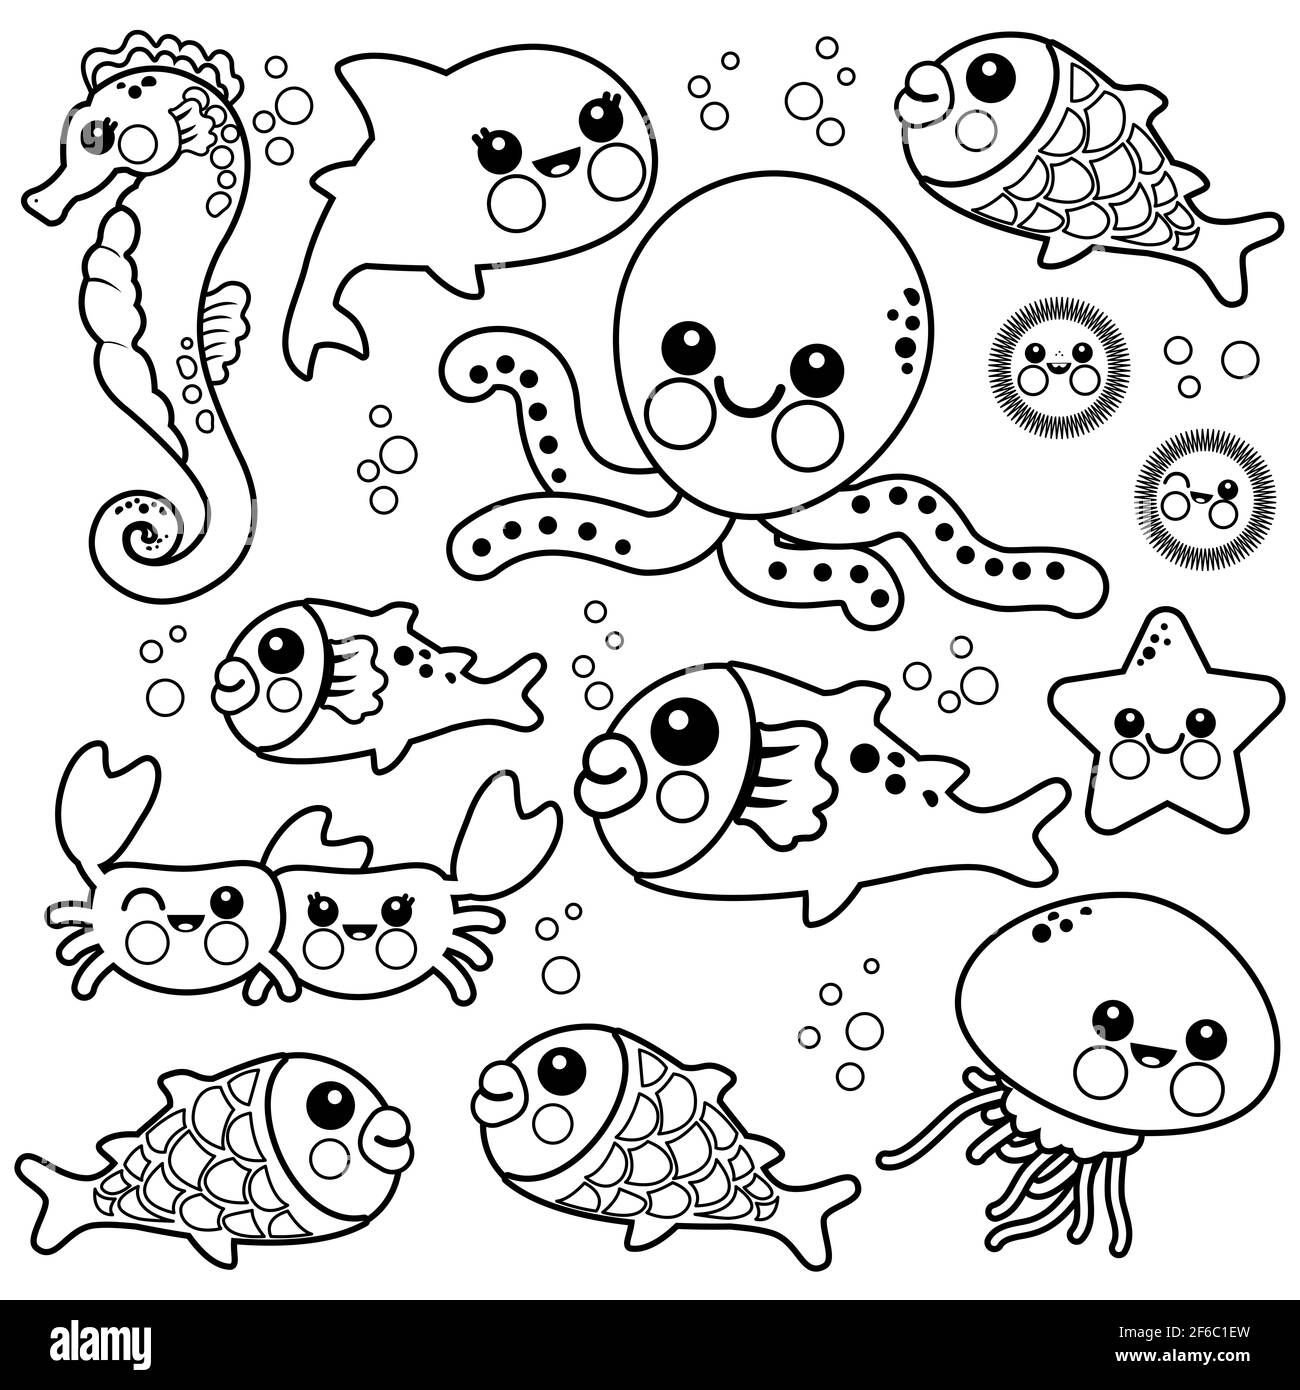 Sea animals swimming in the sea. Black and white coloring page. Stock Photo